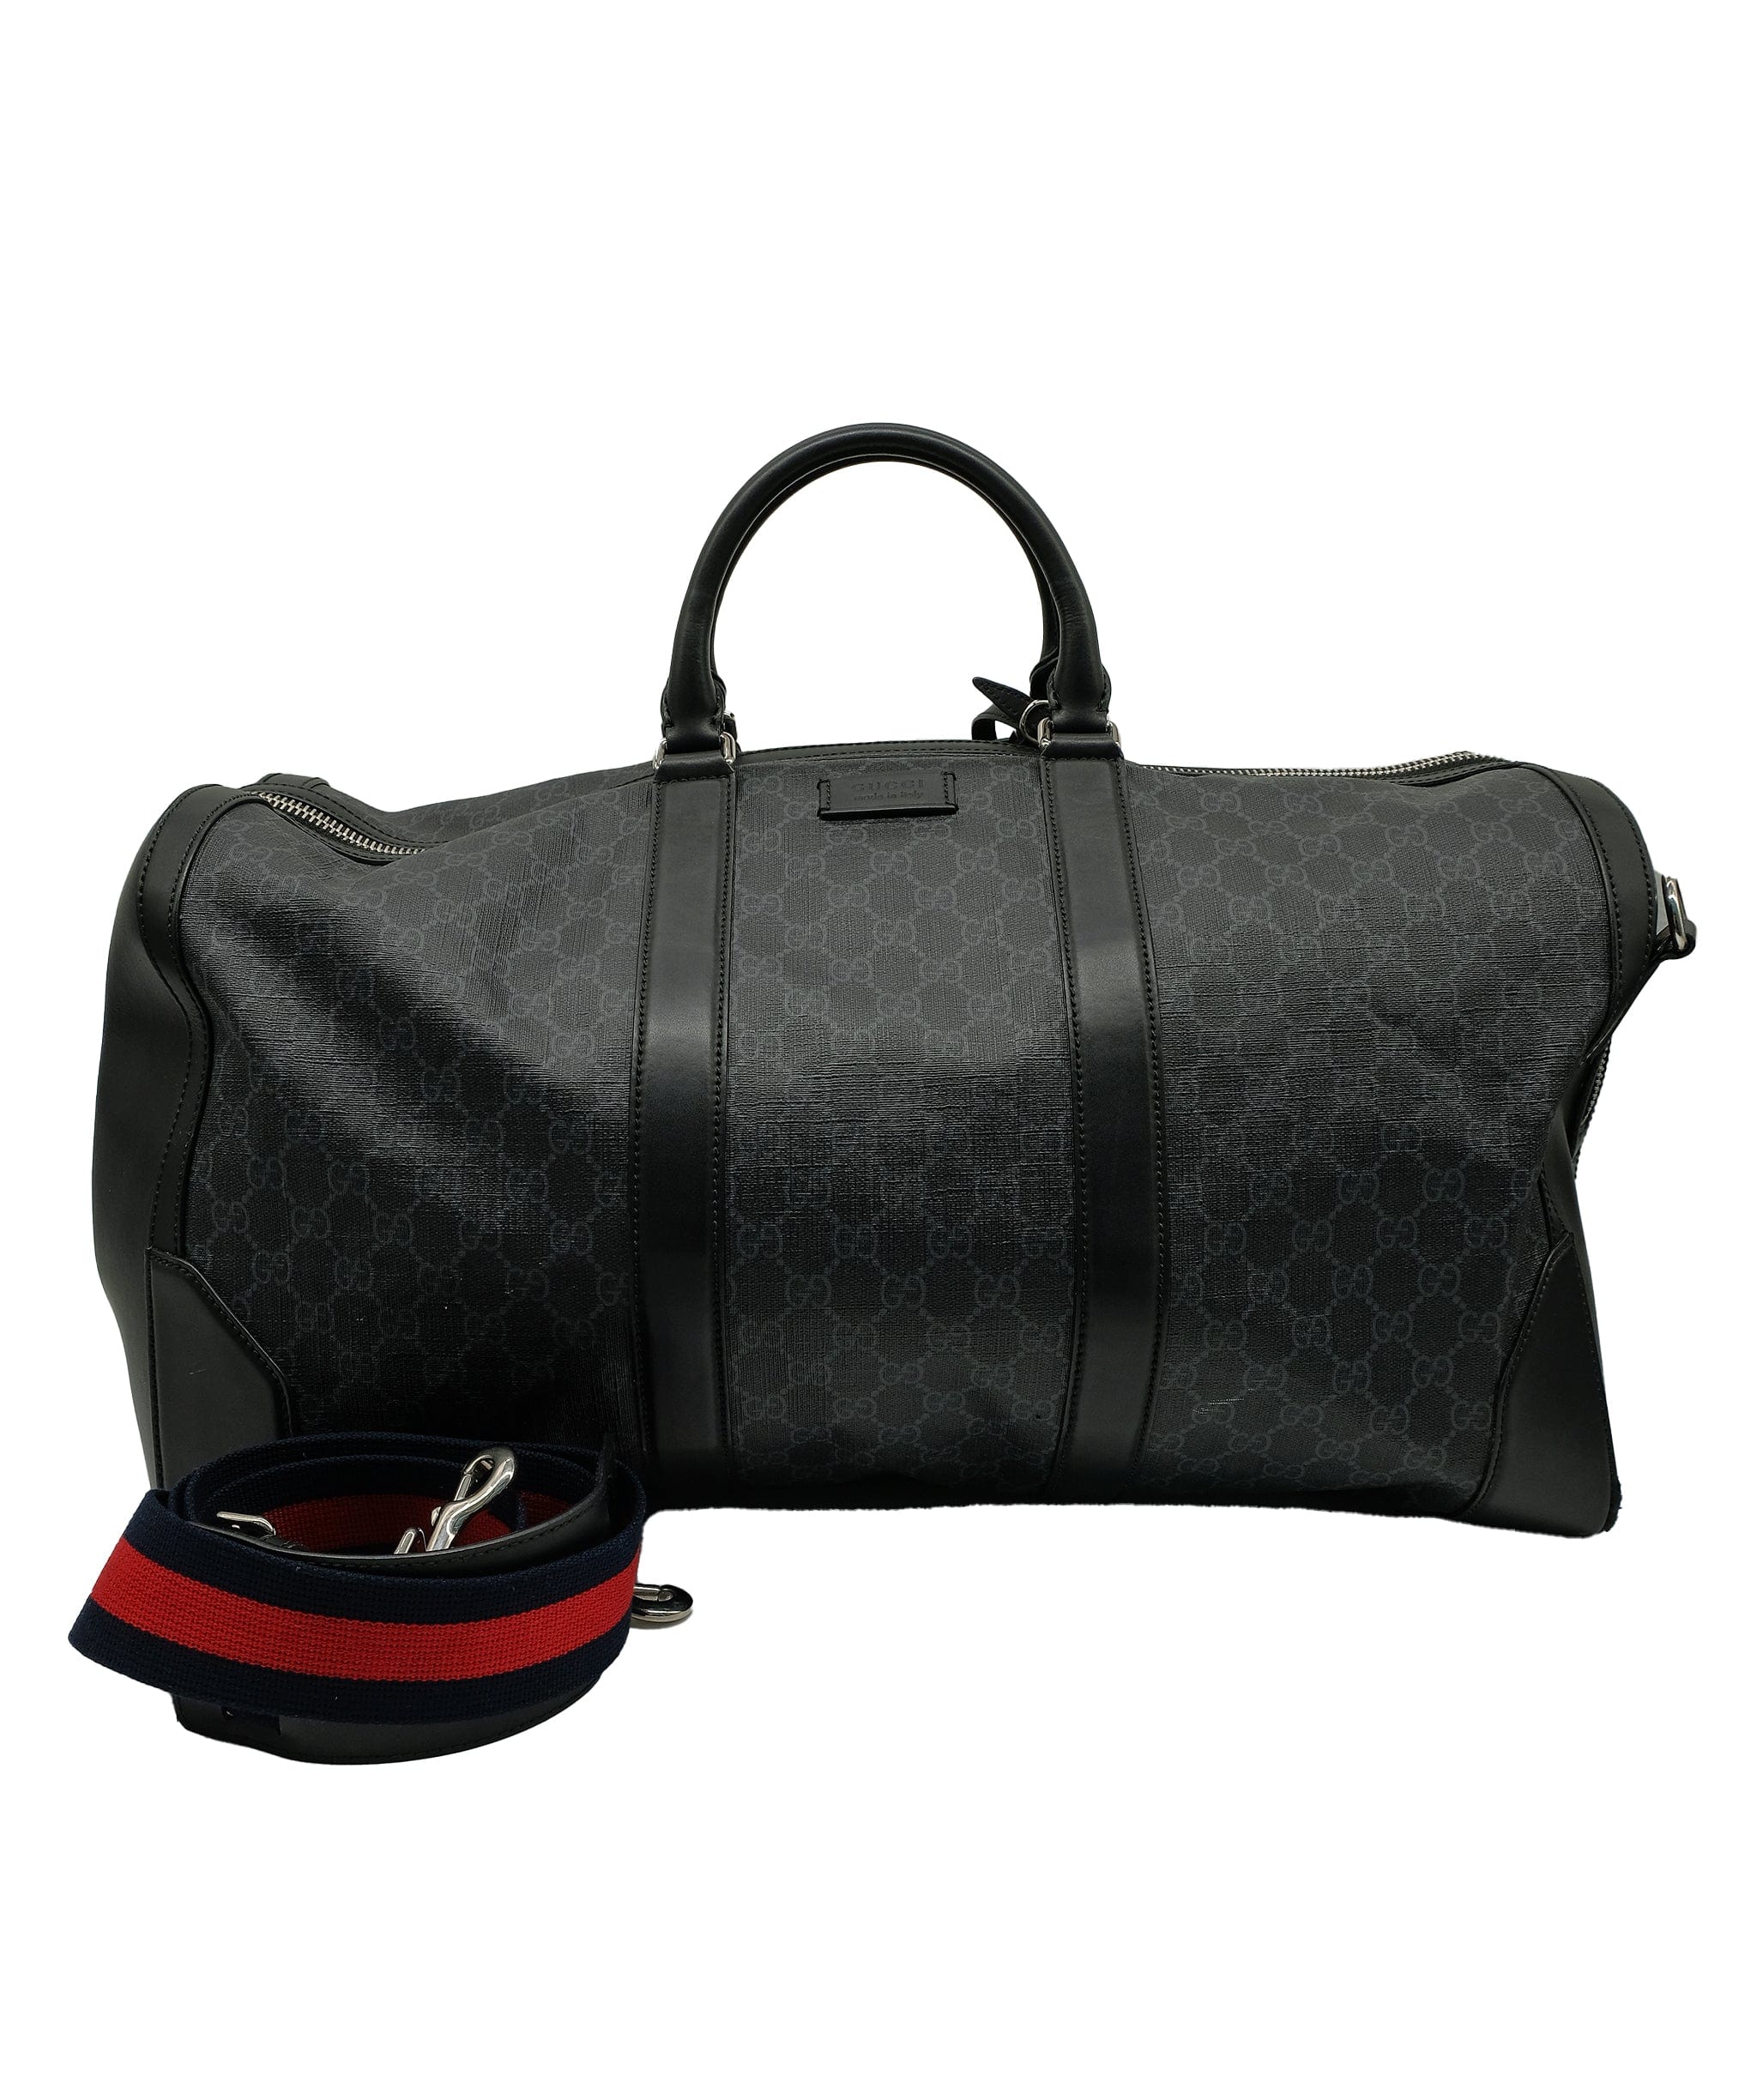 Gucci Gucci GG BLACK CARRY-ON DUFFLE RJC3164